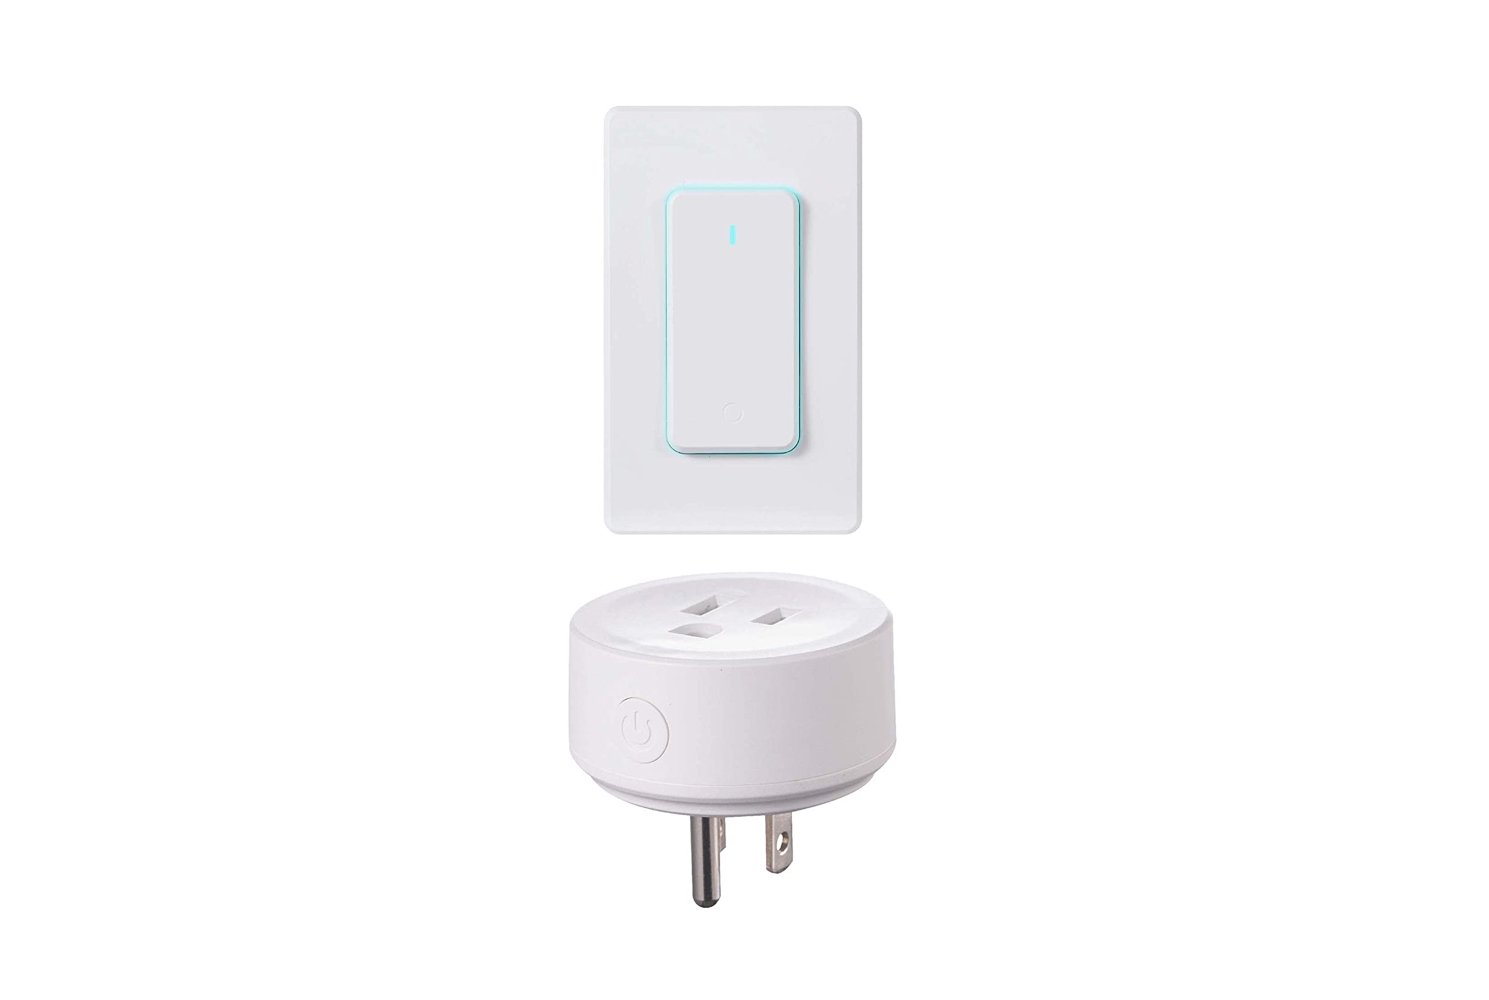 Zoiinet Remote Control Outlet Plug Switch